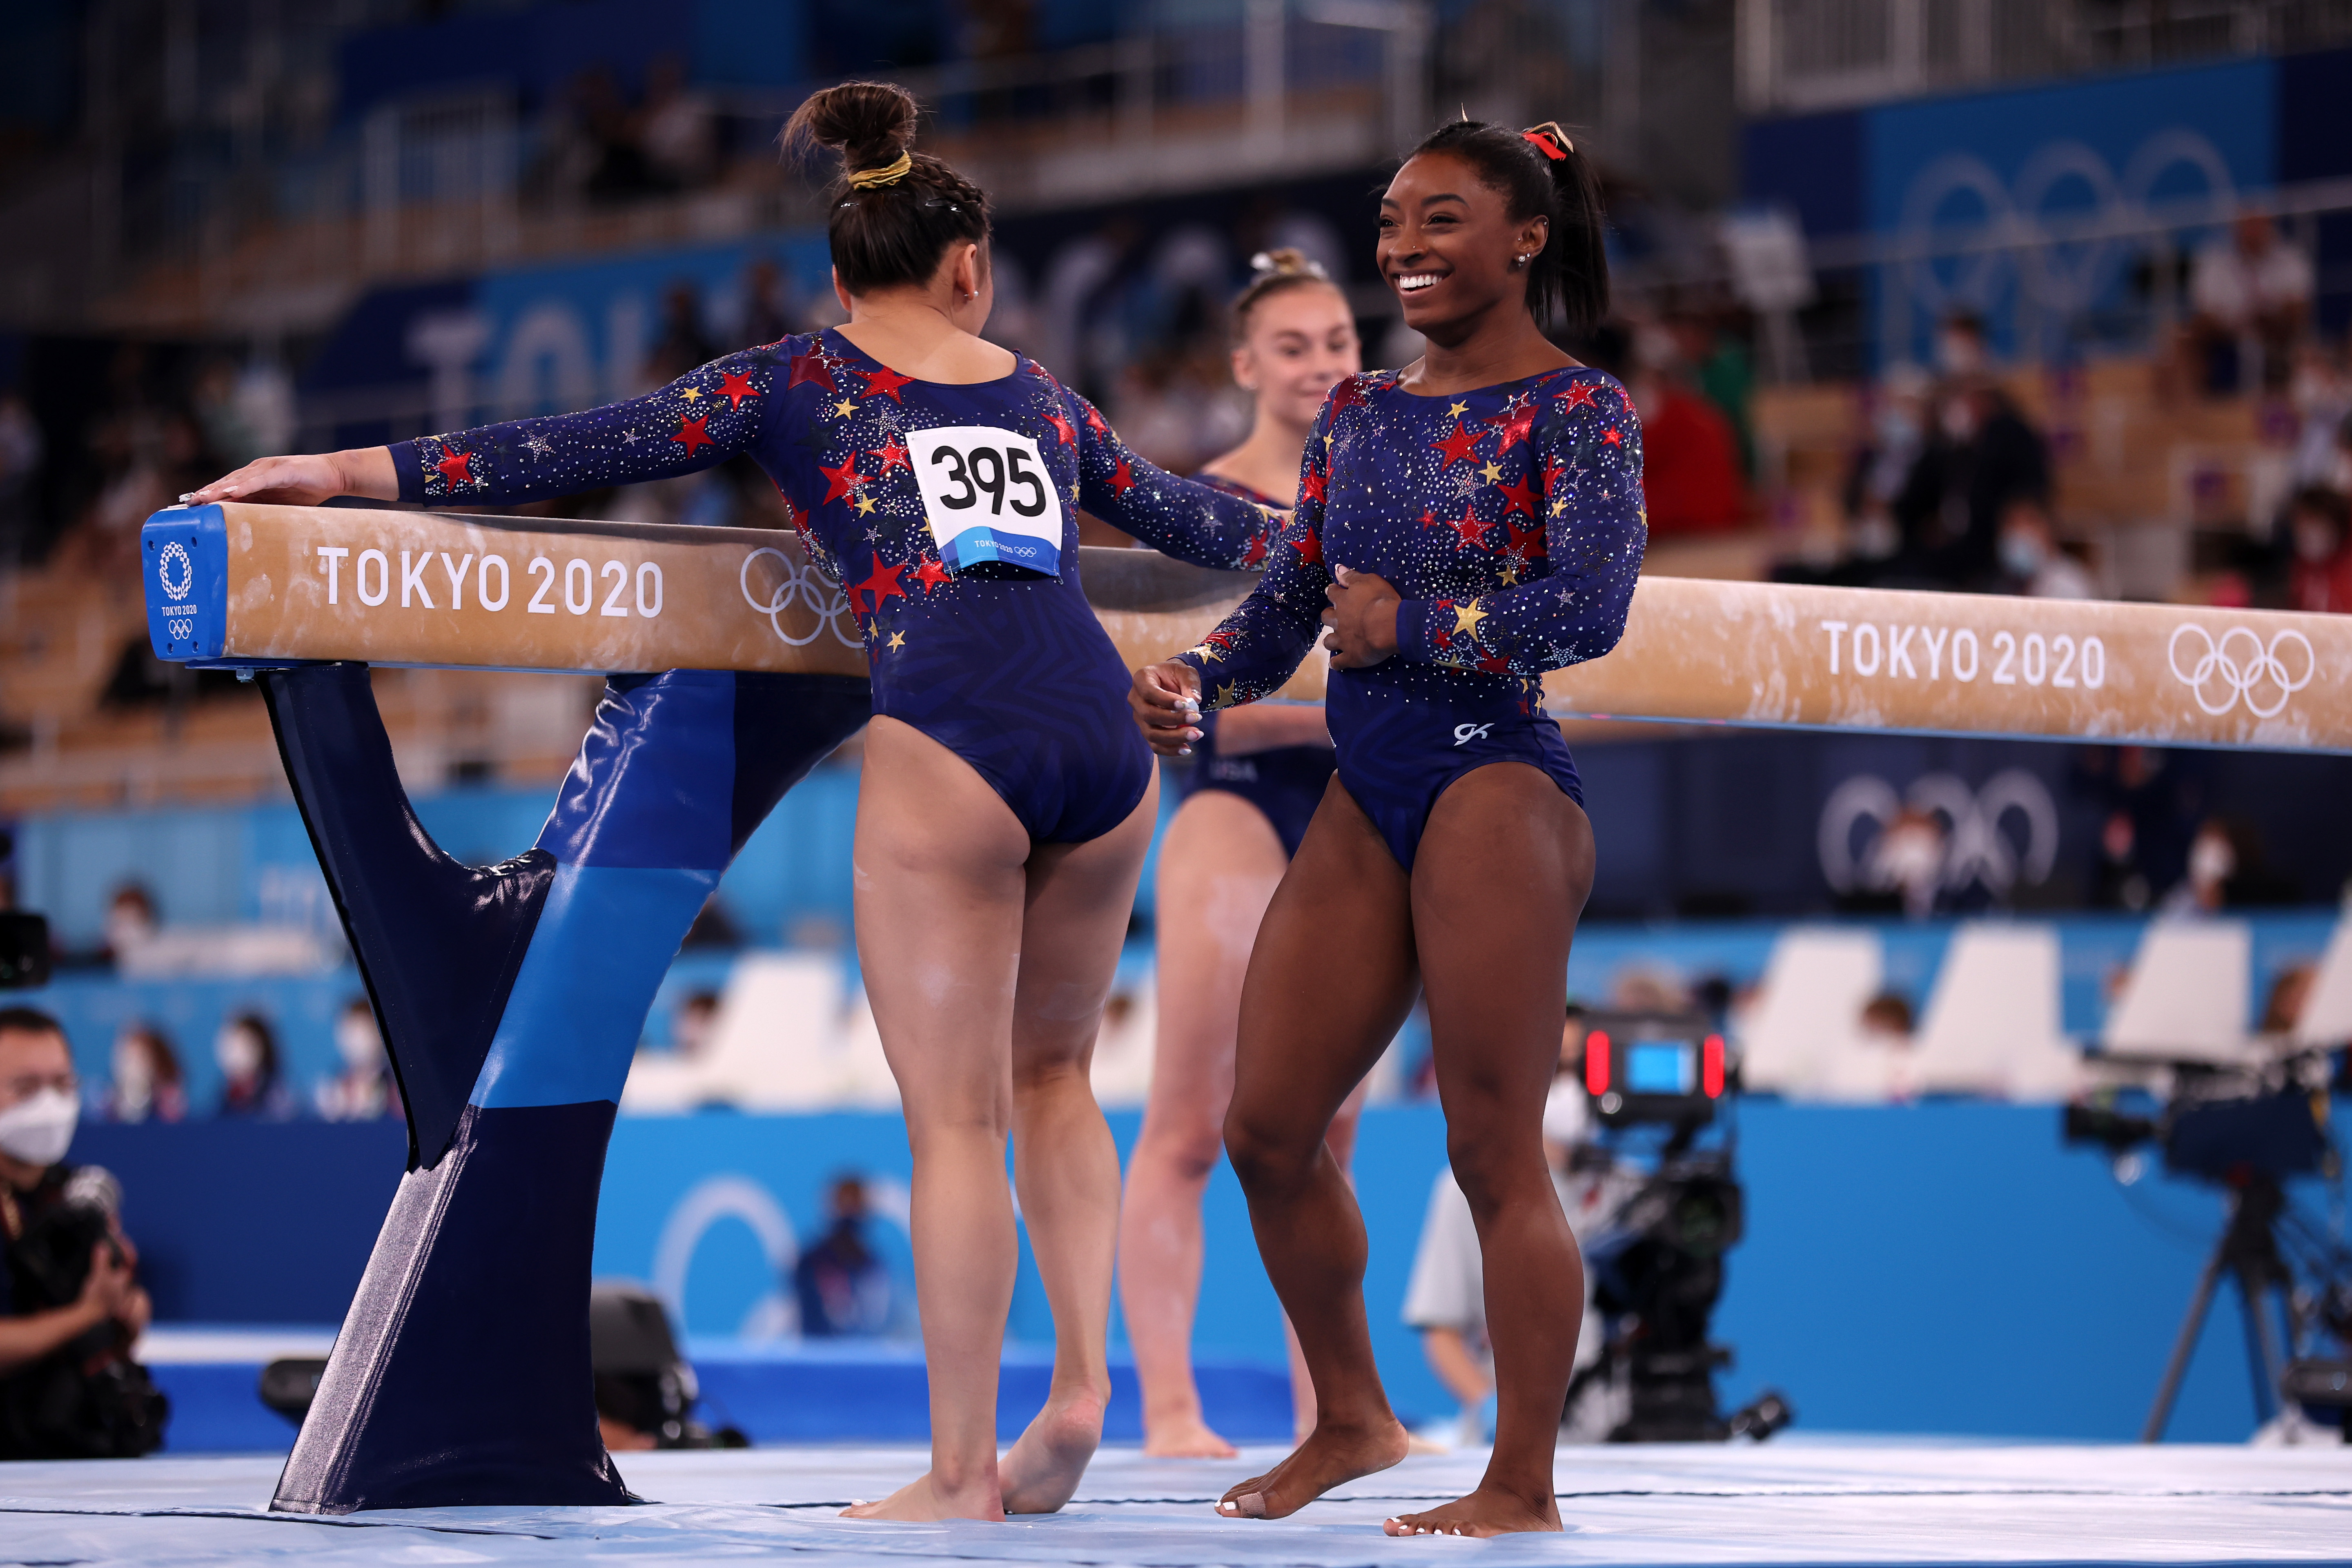 Want to see Simone Biles and Suni Lee compete live in Tokyo? Here's how to  watch.